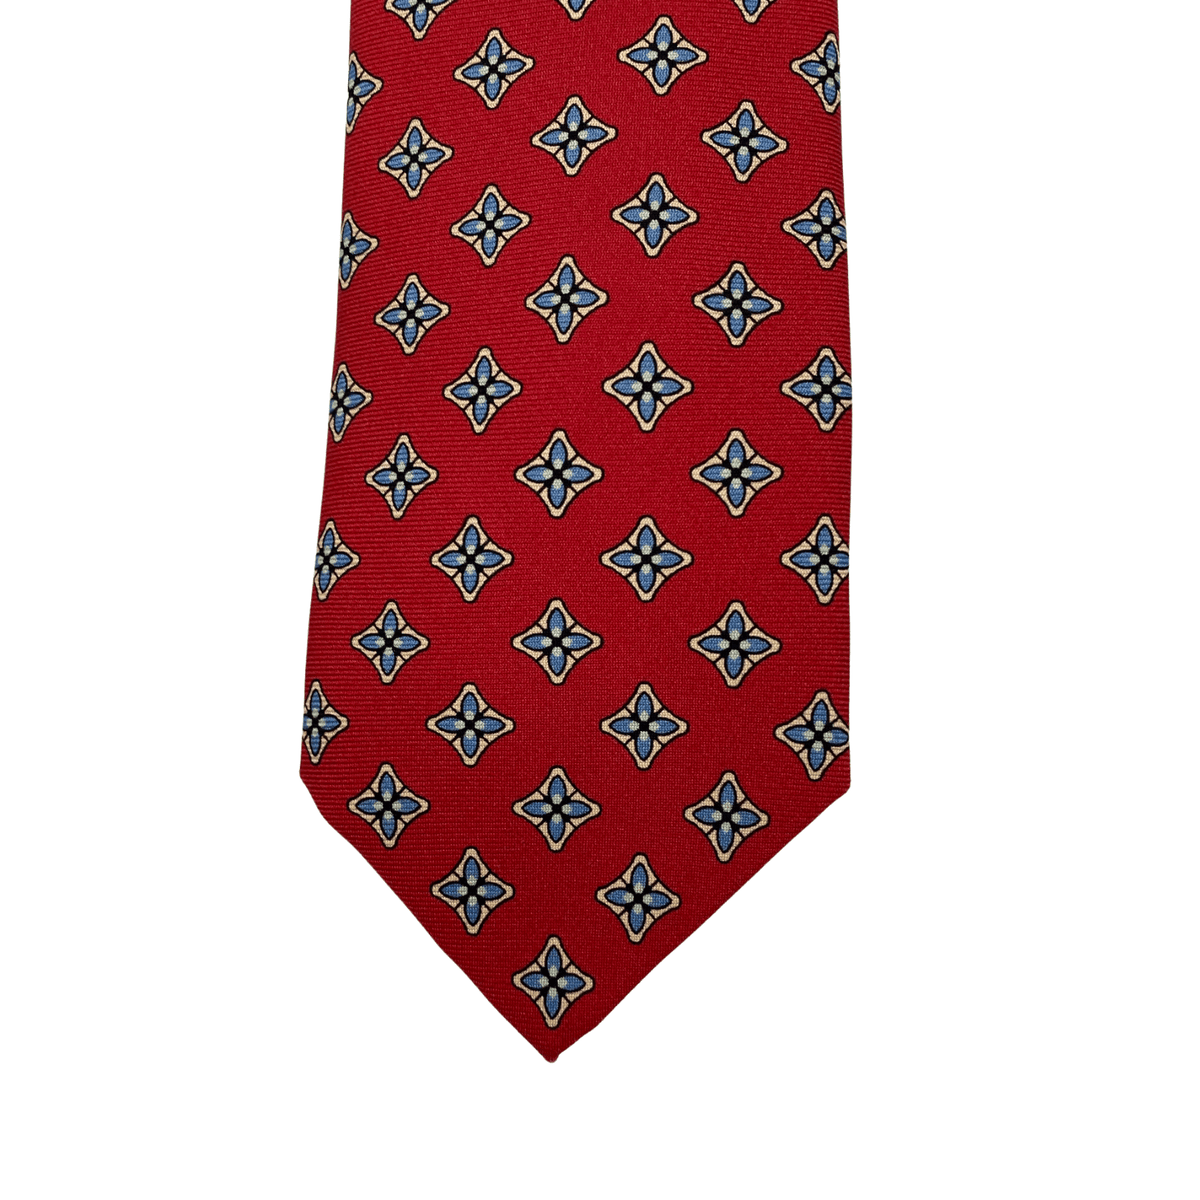 THOMAS PINK Abstract Floral Neat Pattern Tie - Red & Blue New w